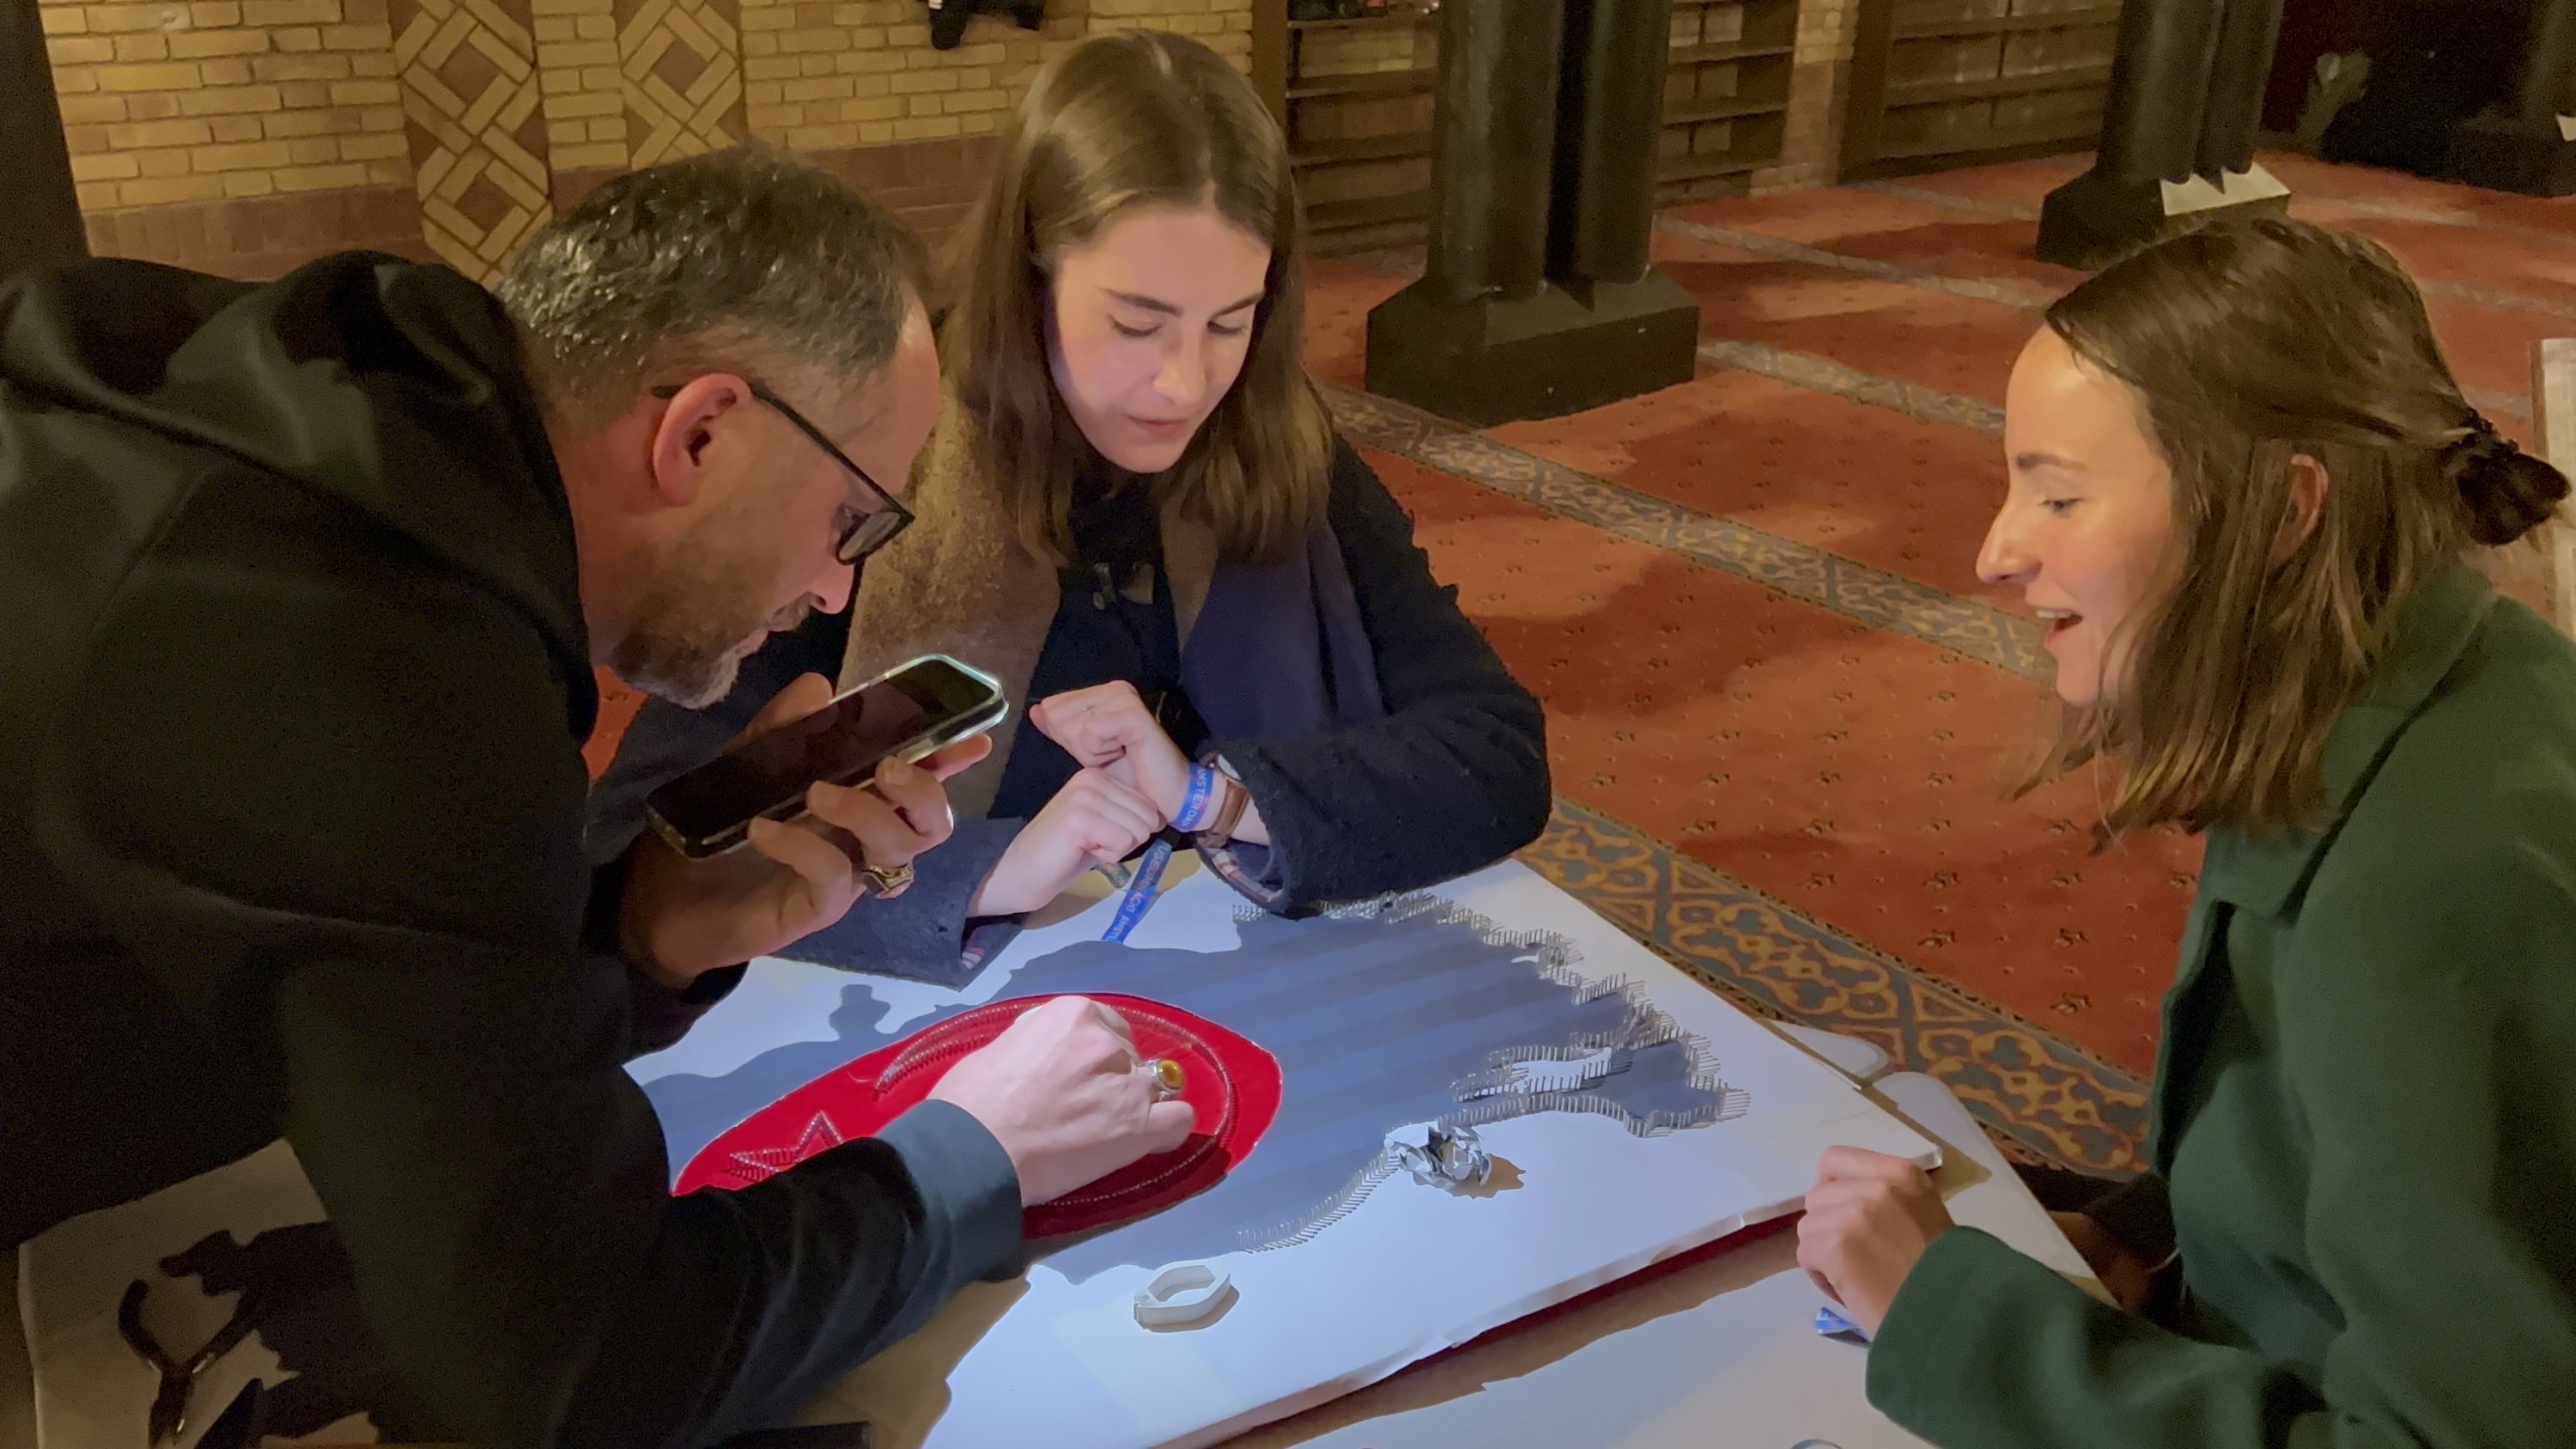 Visitors discover Islamic culture at the Fatih Mosque in Amsterdam as part of the 